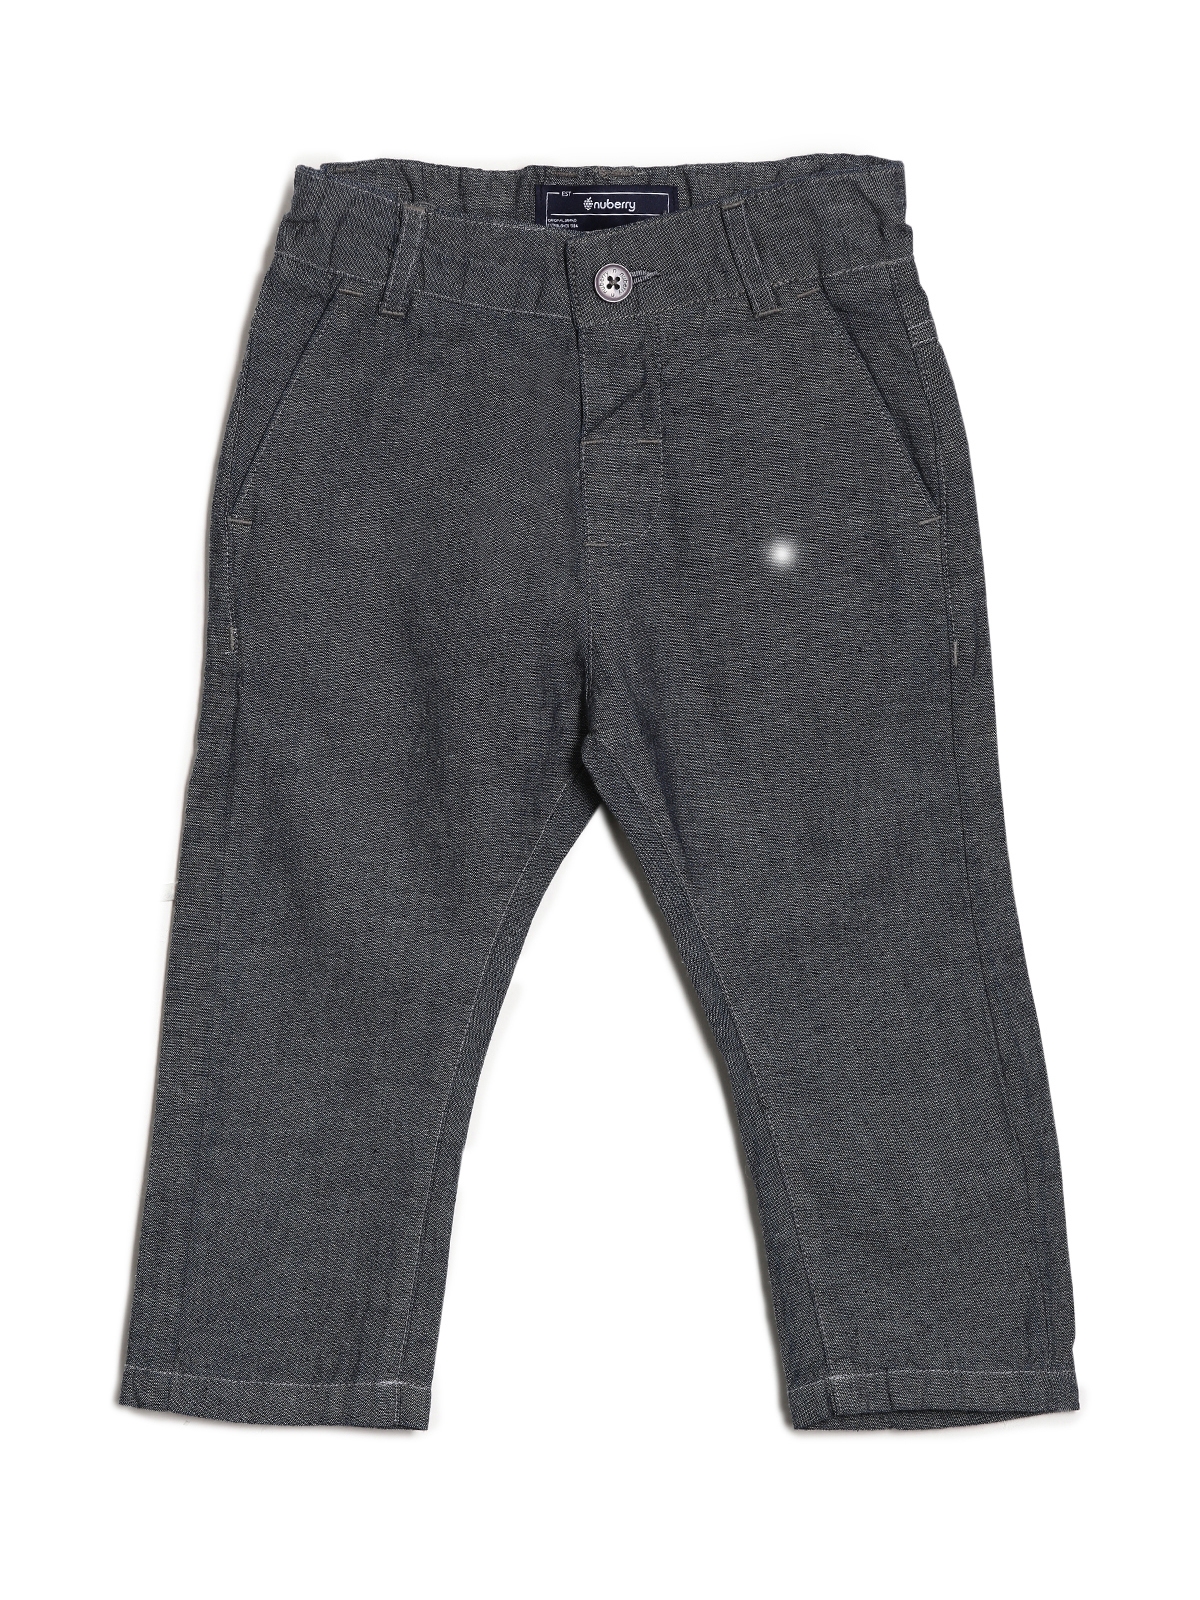 Nuberry | Boy Pant Woven